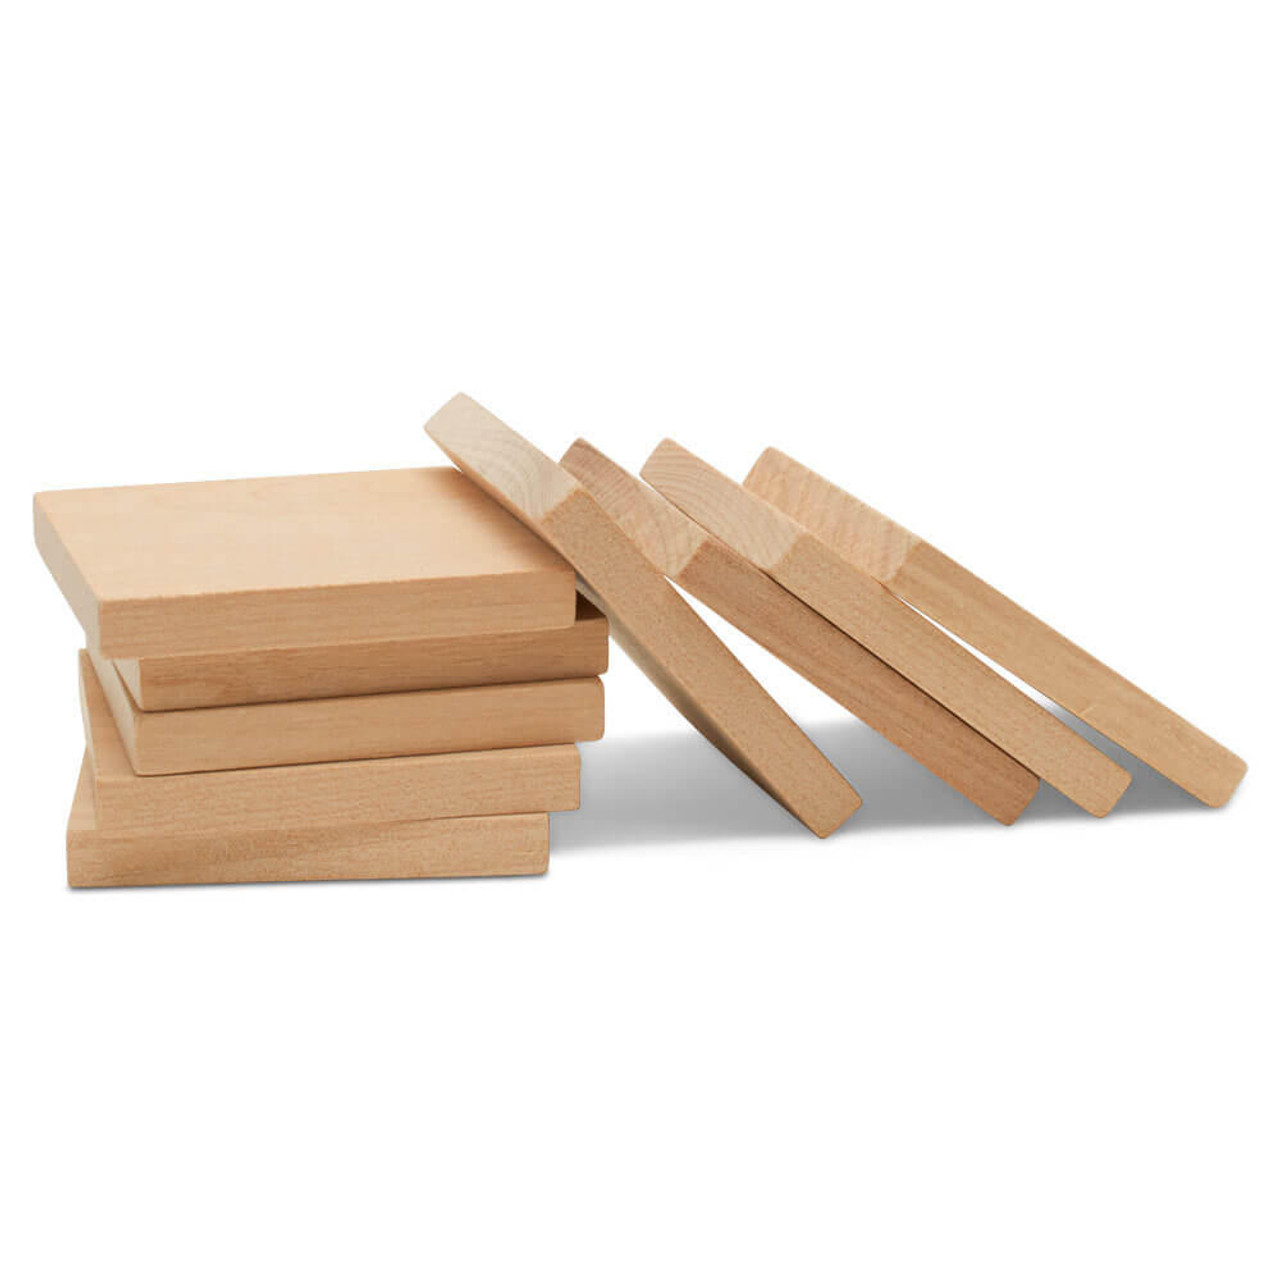 Wooden Square Cutout, 2 by 2, 1/4 thick